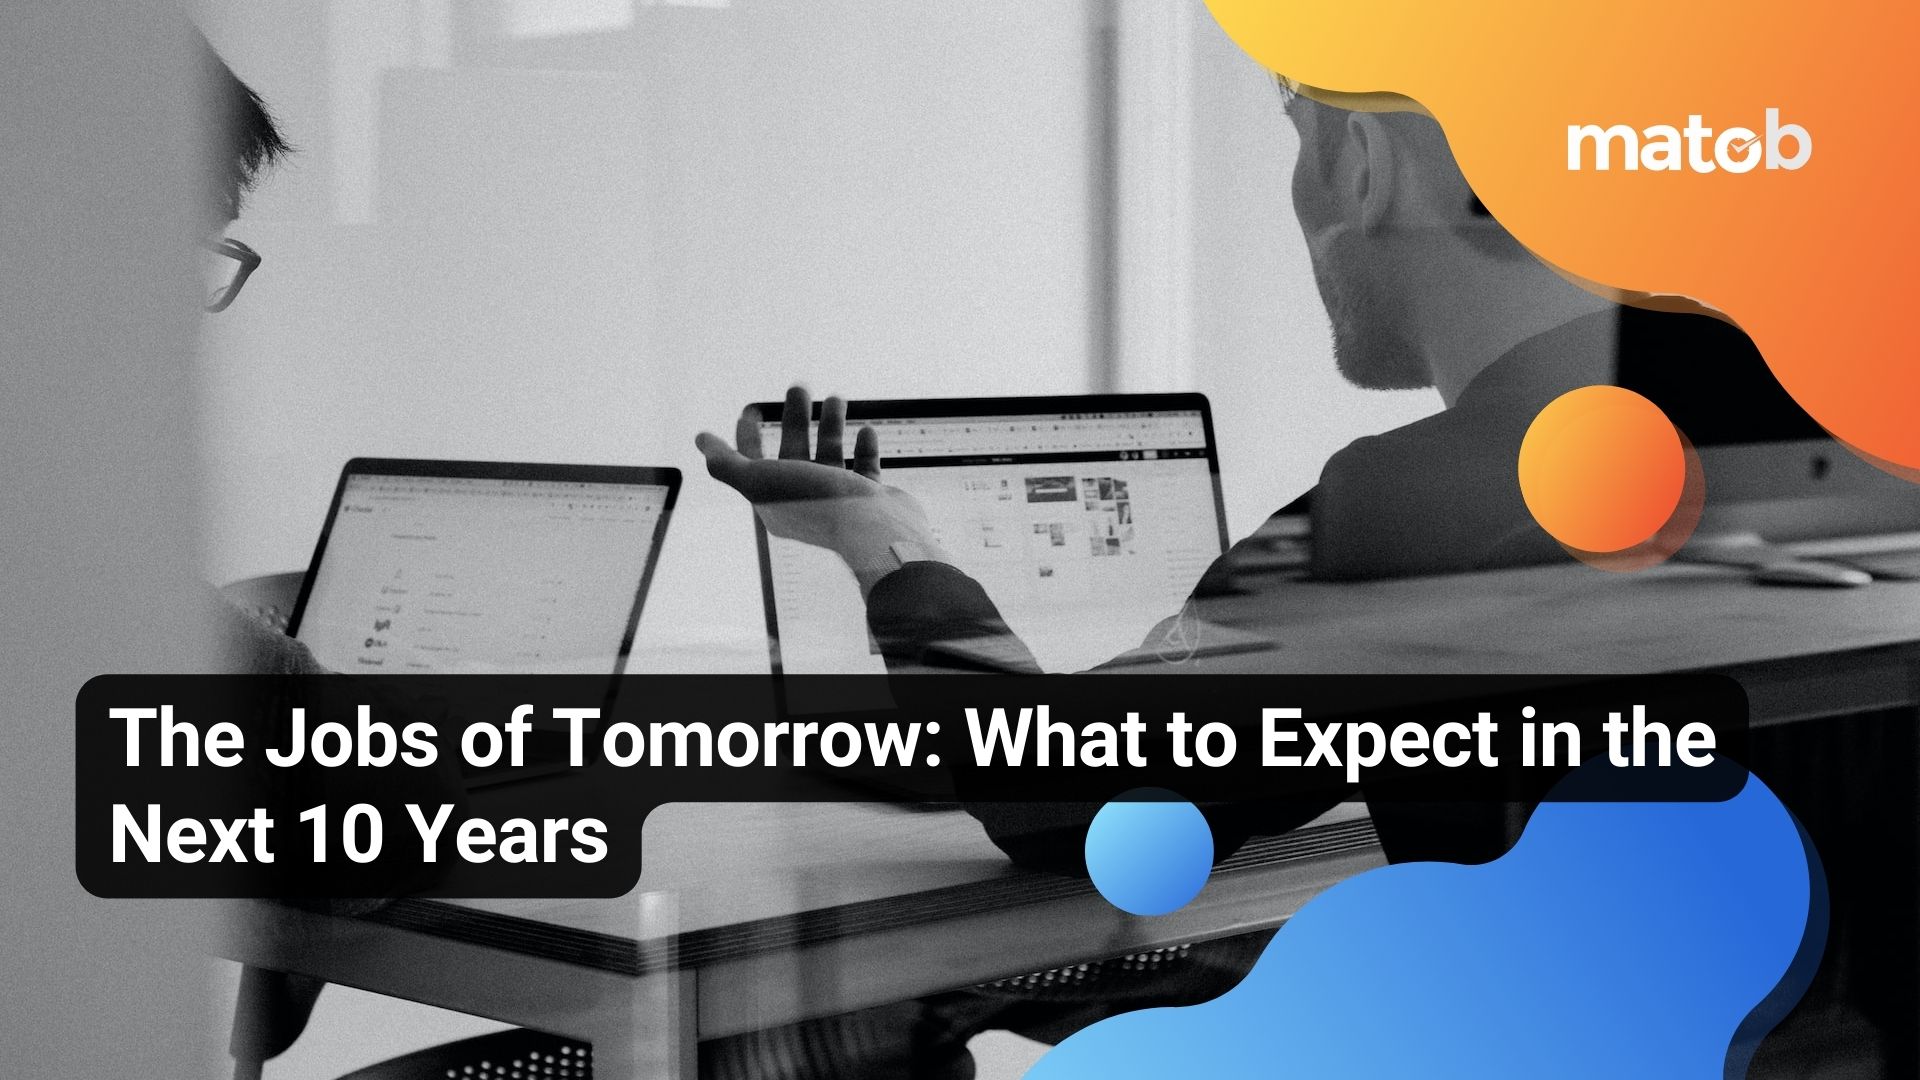 The Jobs of Tomorrow: What to Expect in the Next 10 Years